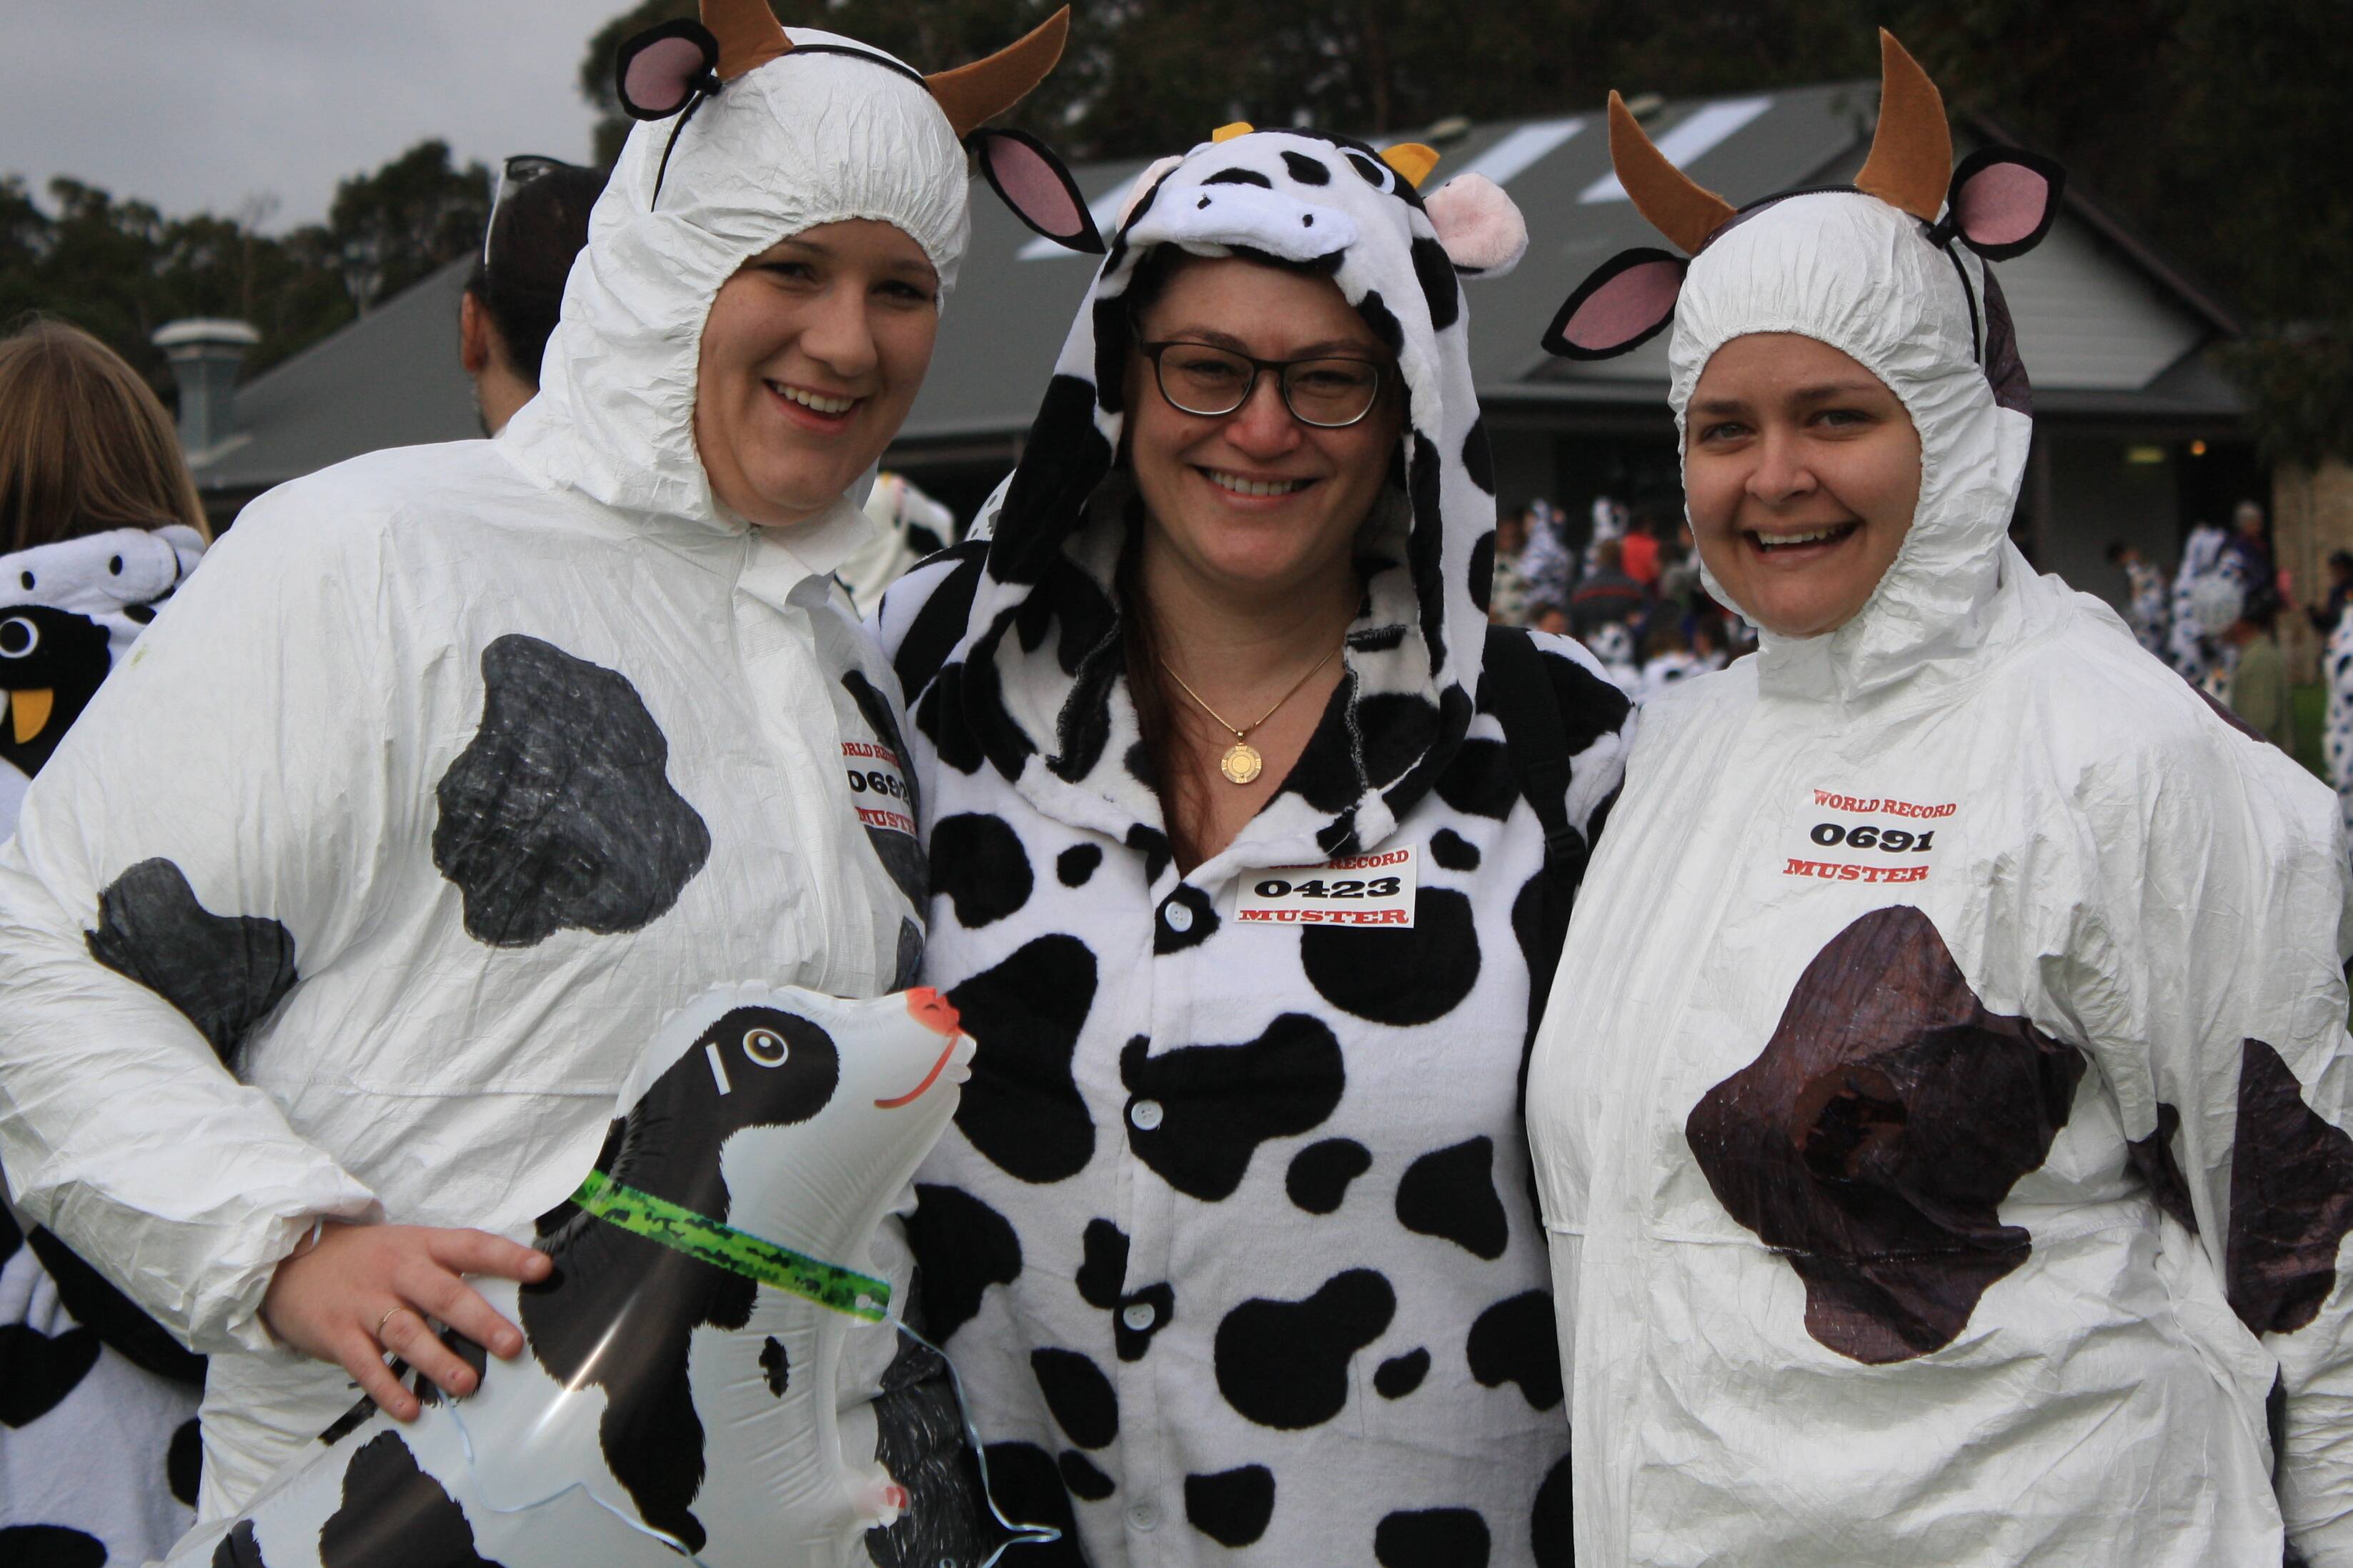 Two Phat Cows - Remember when we used to wear bras #throwback to a more  glamorous time!! 🤣 We're telling you, when all this is over, we're going  popping some bubbly and